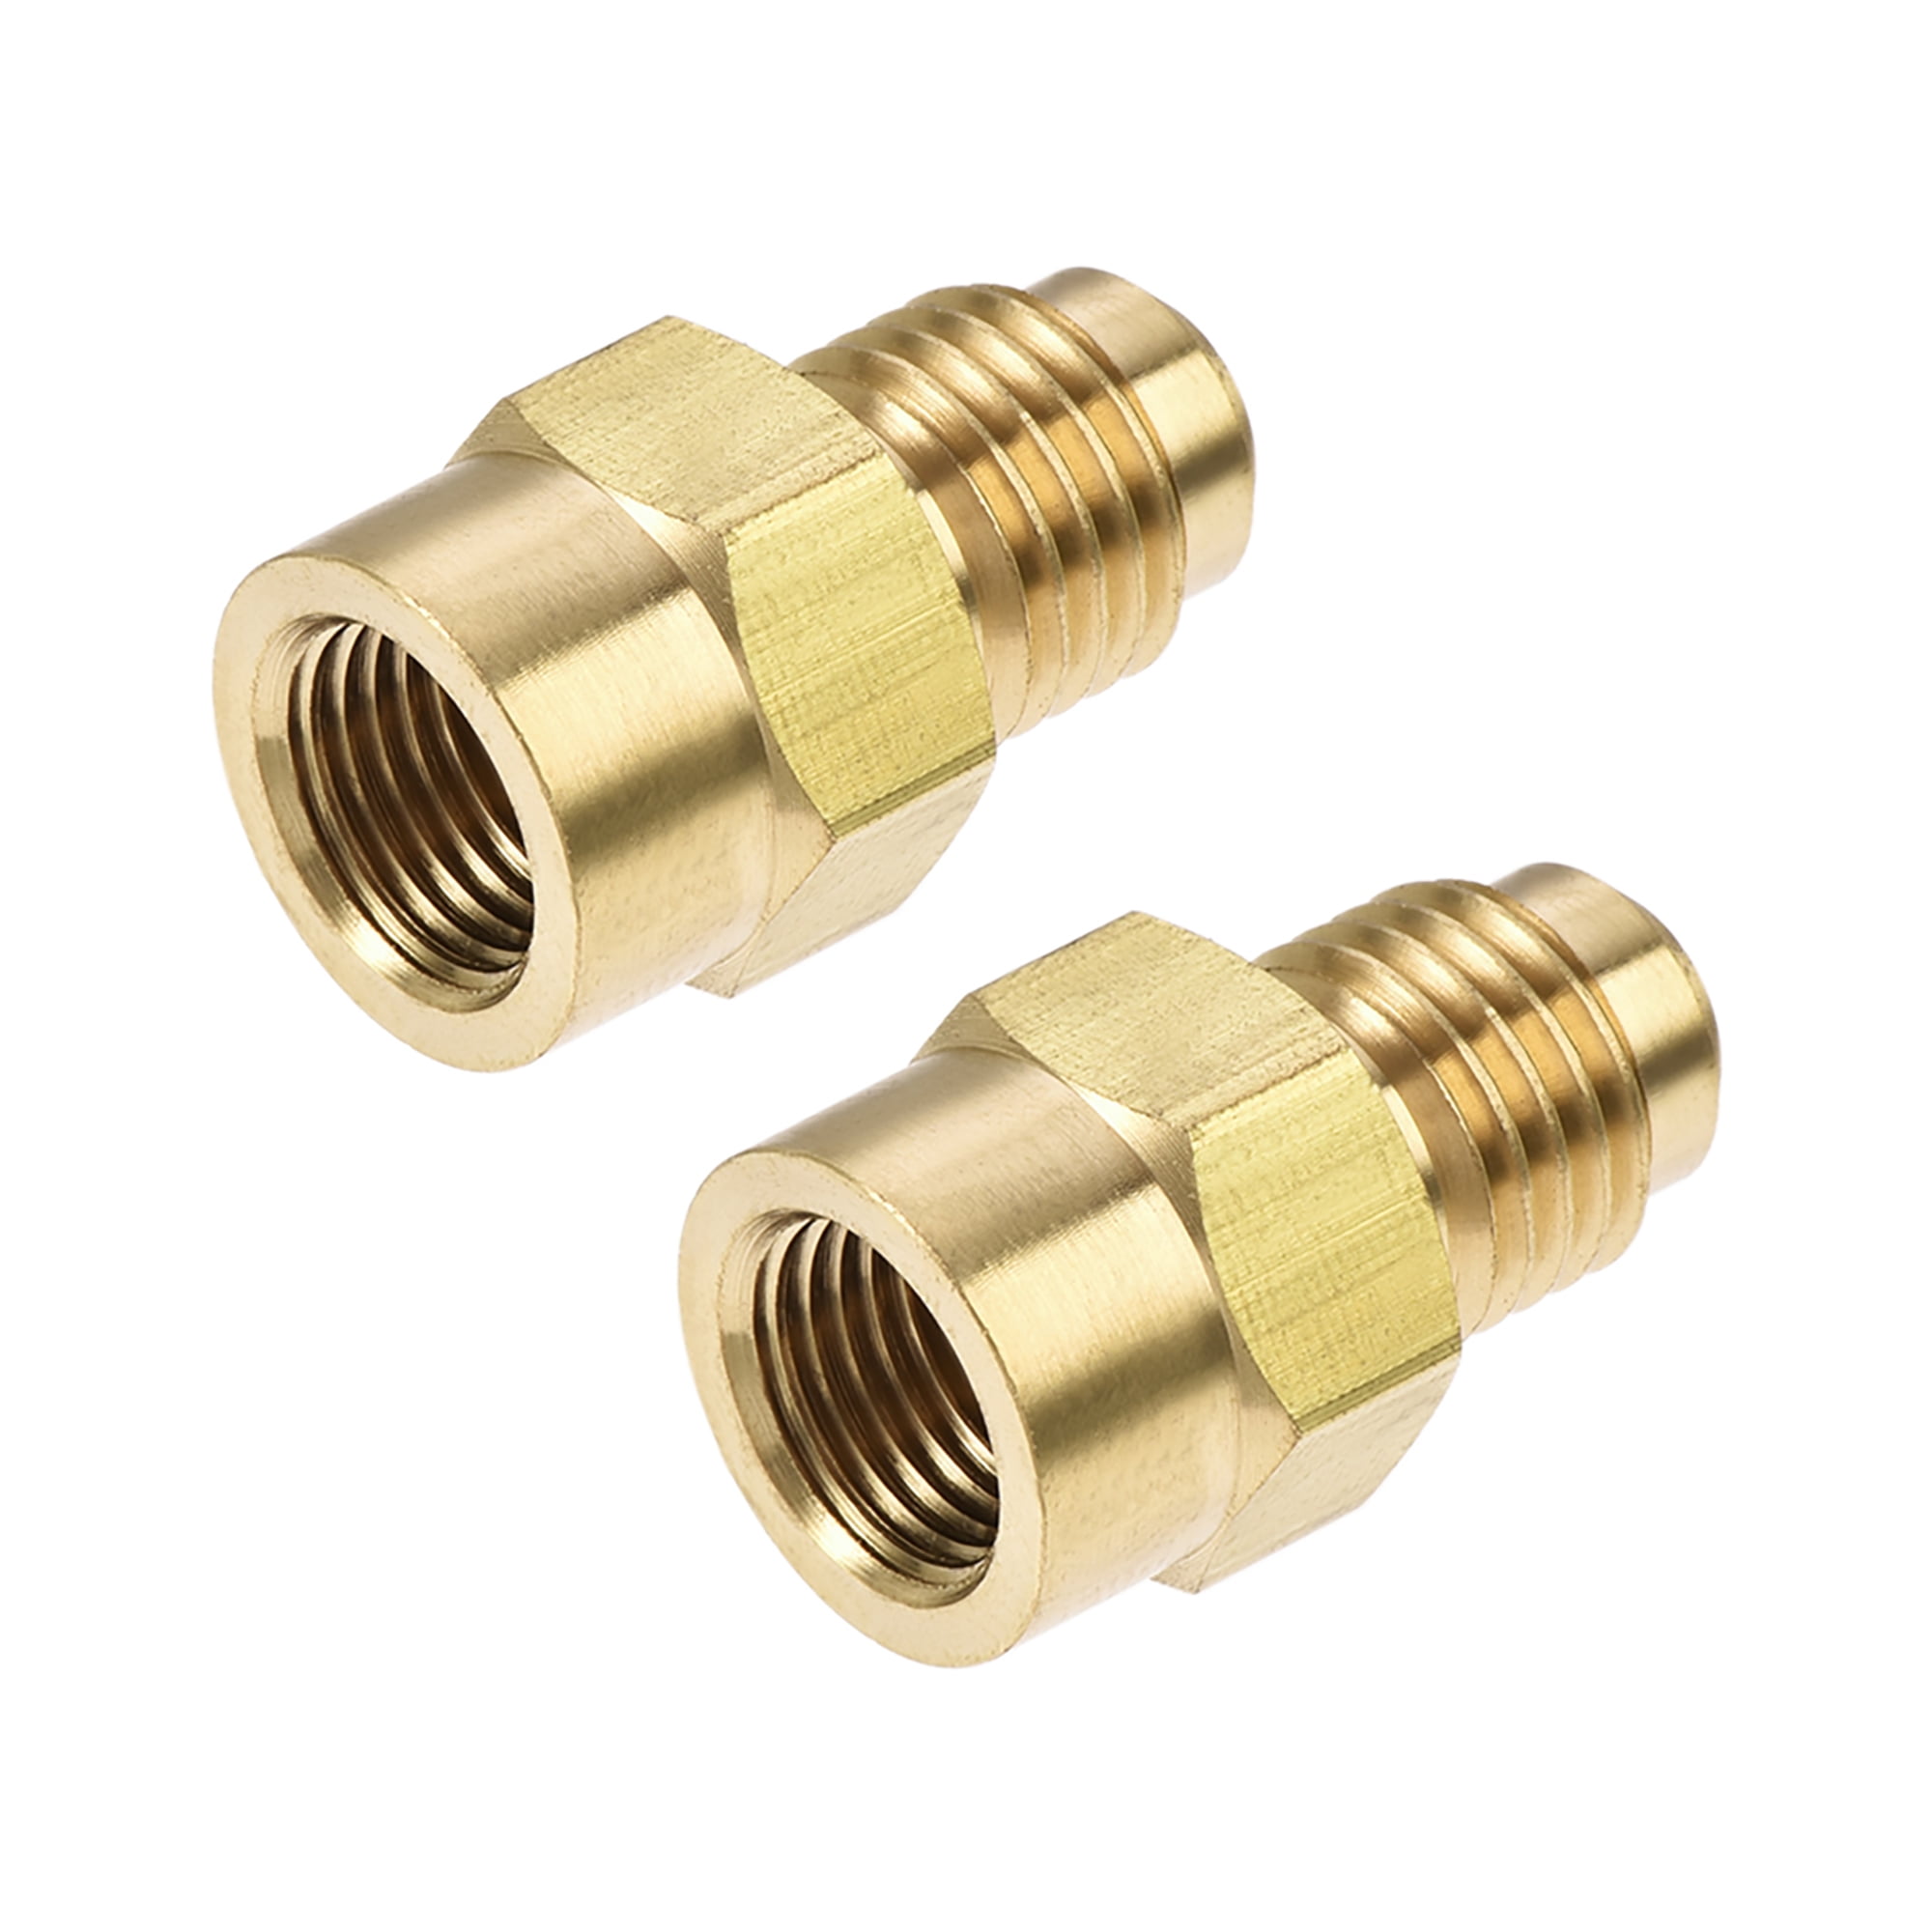 Brass Pipe fitting, 1/4 SAE Flare Male to 1/8NPT Female Thread, Tubing Adapter, for Air